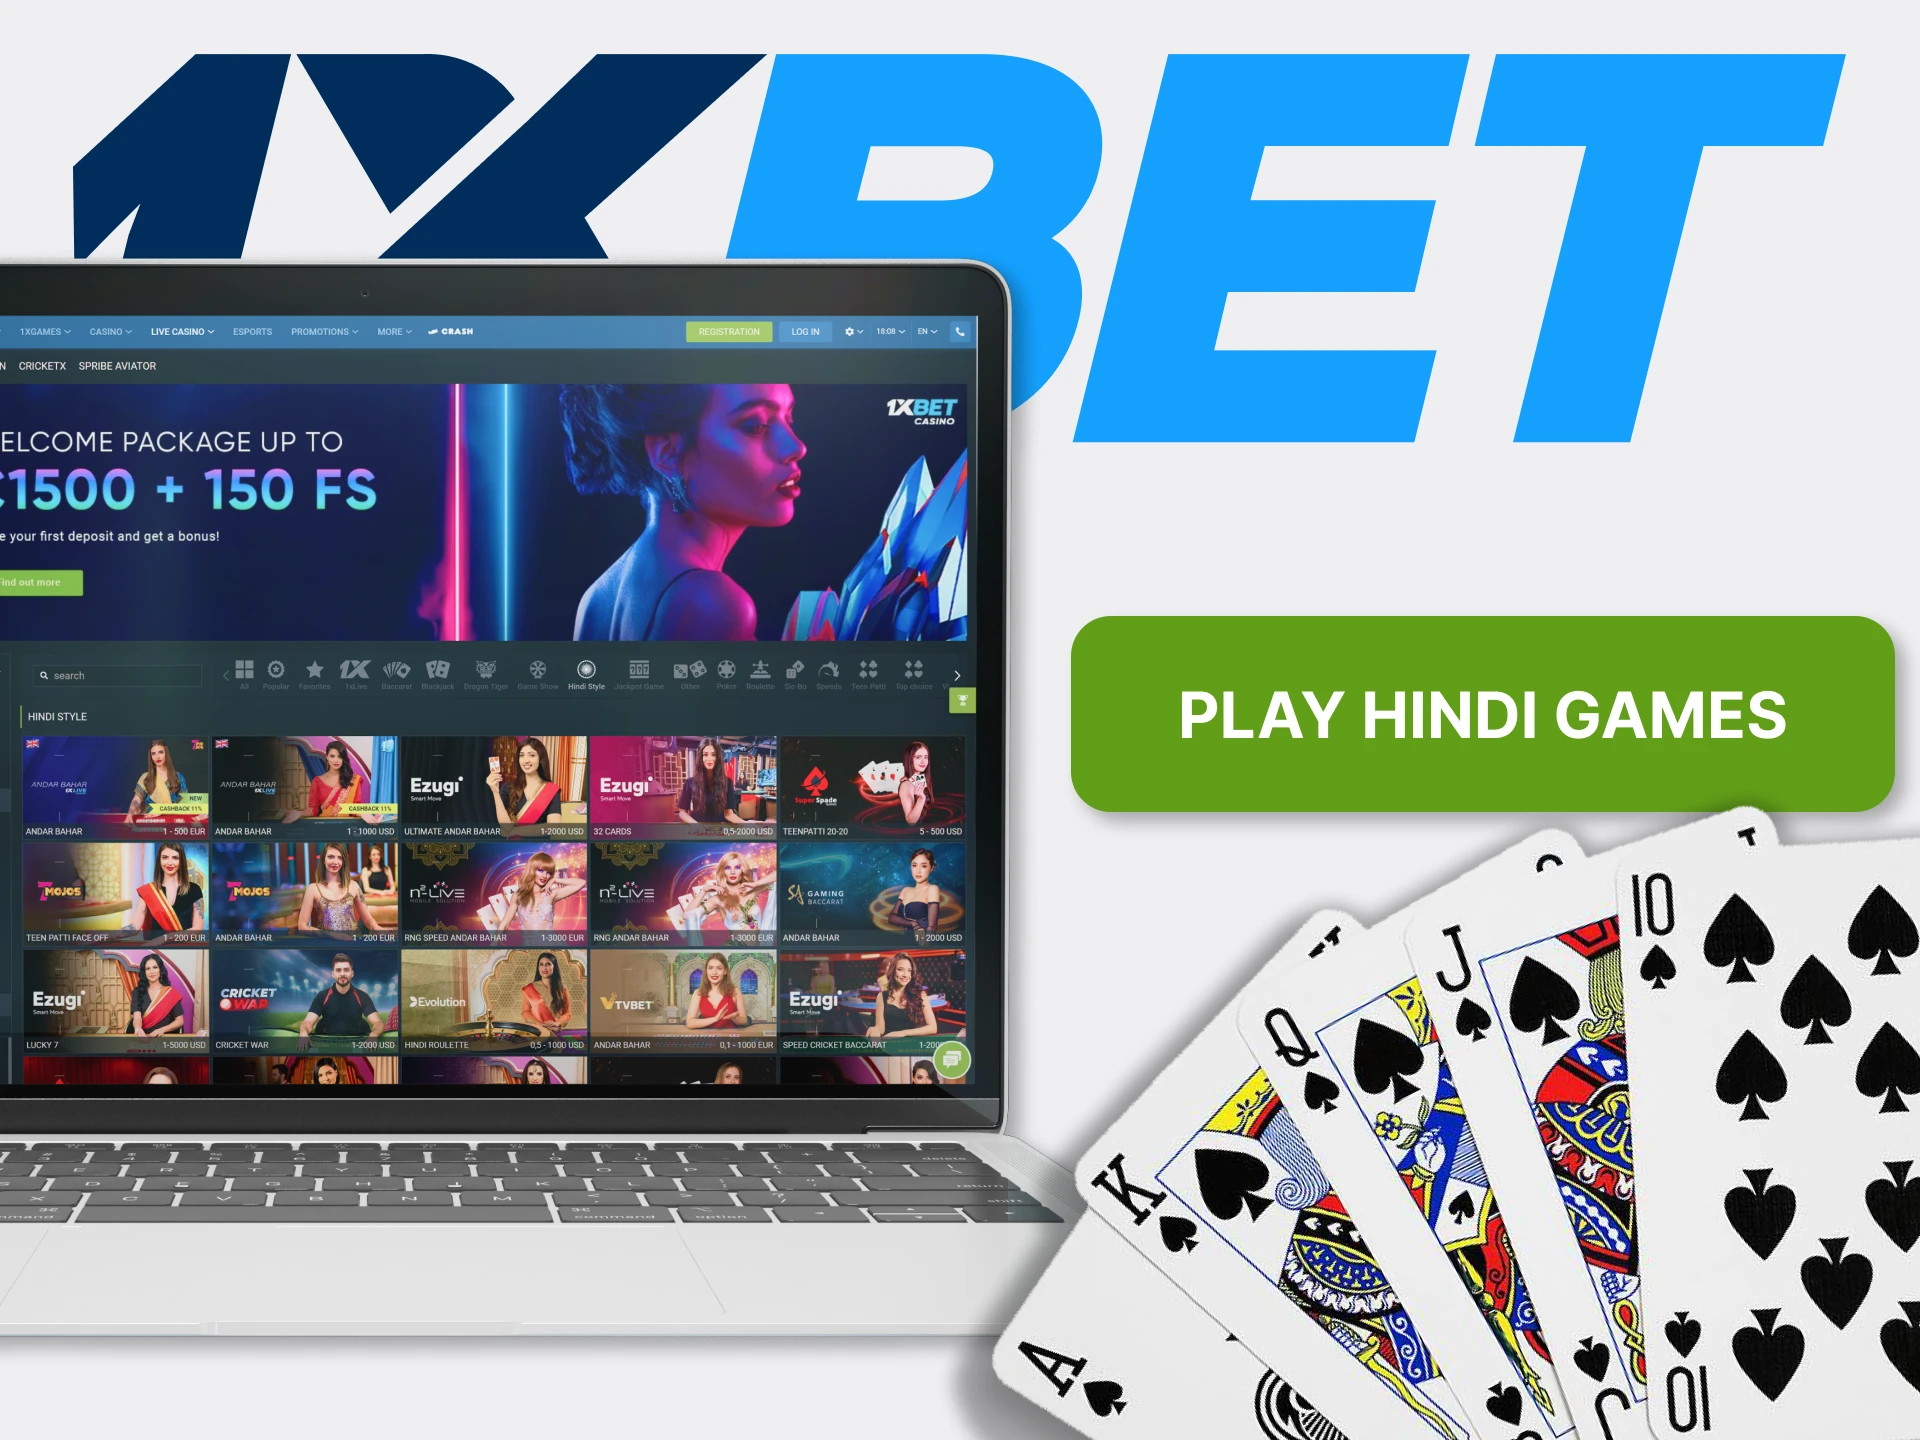 Must Have List Of 1xBet Networks